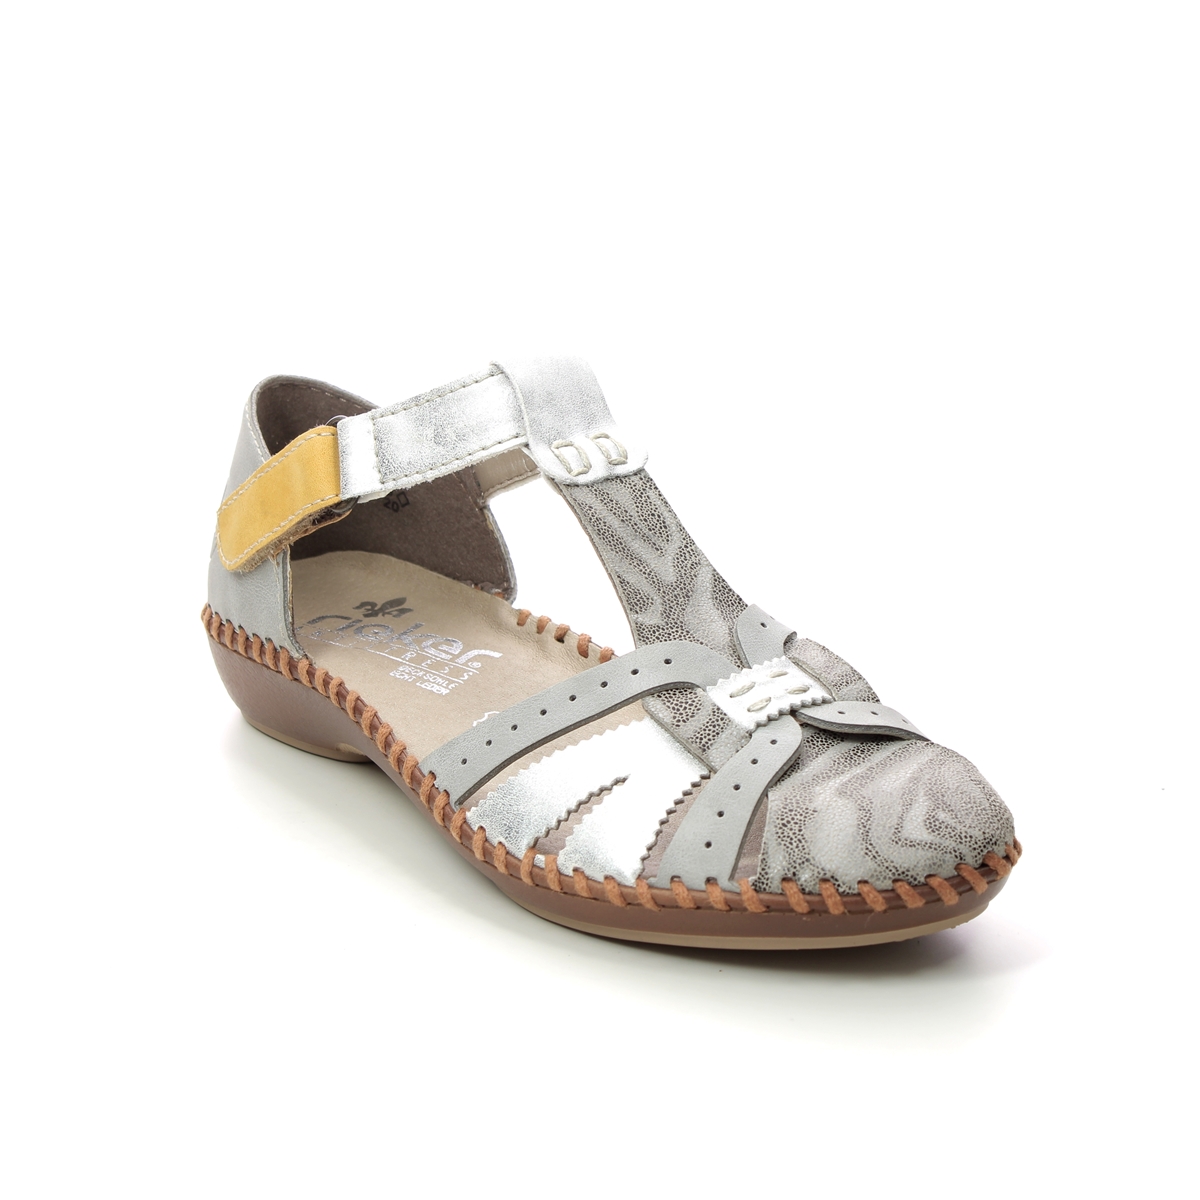 Rieker M1650-90 Taupe Womens Closed Toe Sandals in a Zebra Leather and Man-made in Size 41